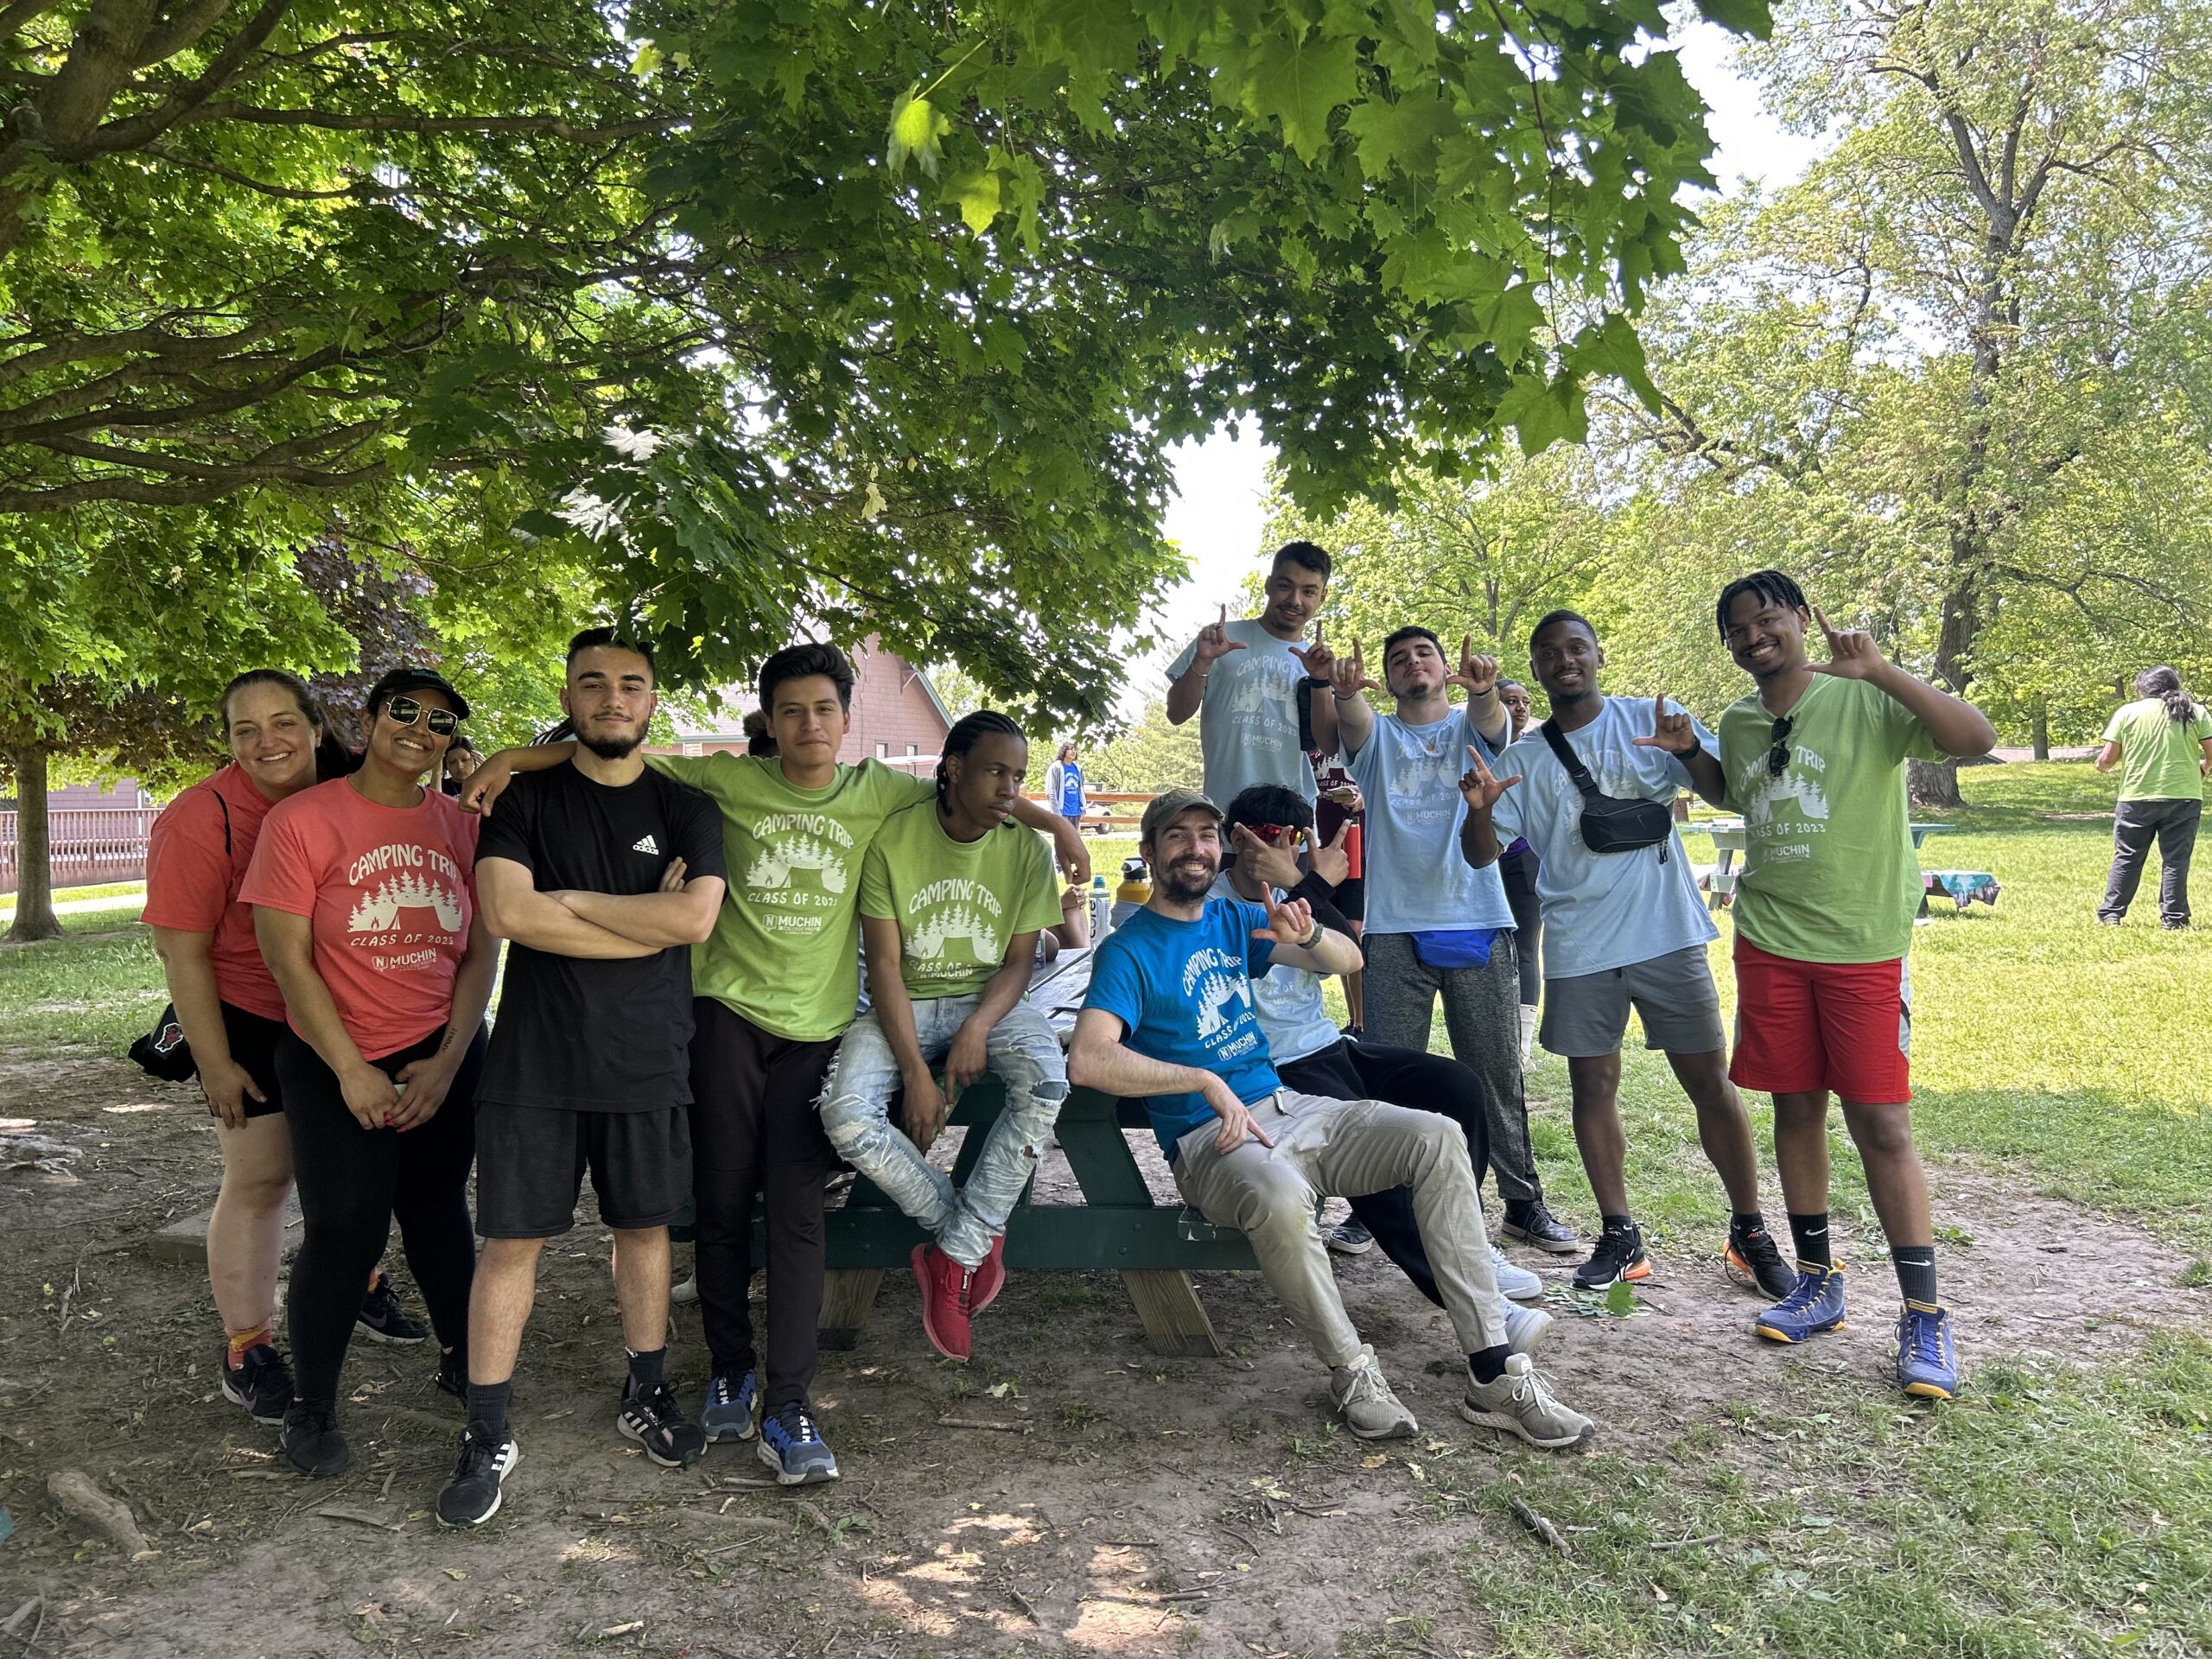 Students pose together on their senior trip. The students are wearing their athletic gear. Students are gathered underneath a tree and one of the teachers is sitting on a chair.